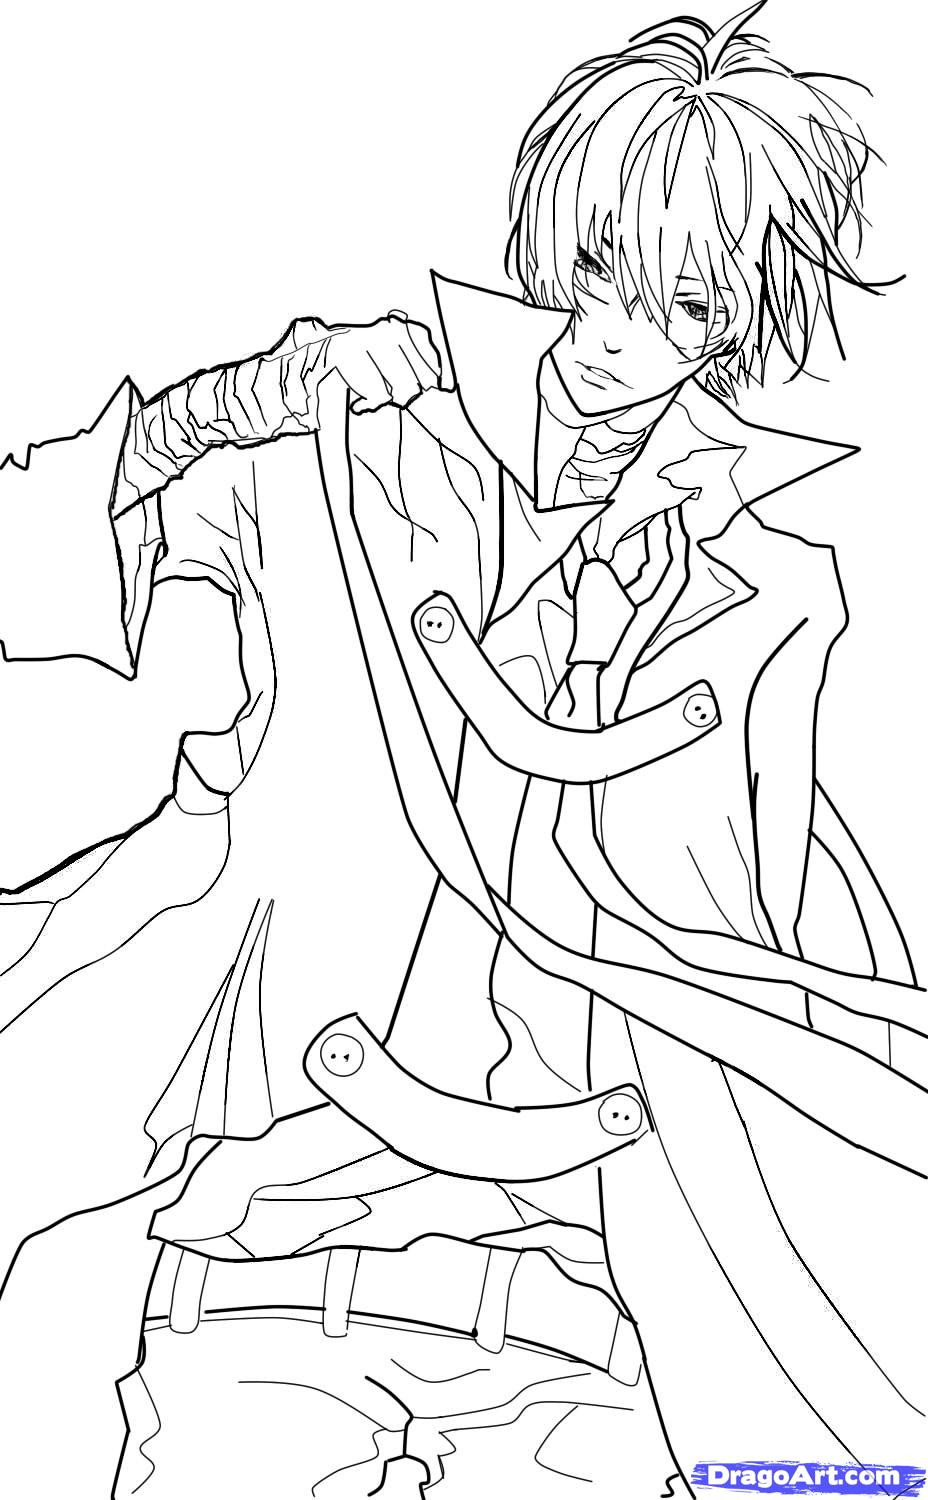 Anime Ninja Coloring Pages For Boys
 How to Sketch an Anime Boy Step by Step Anime People